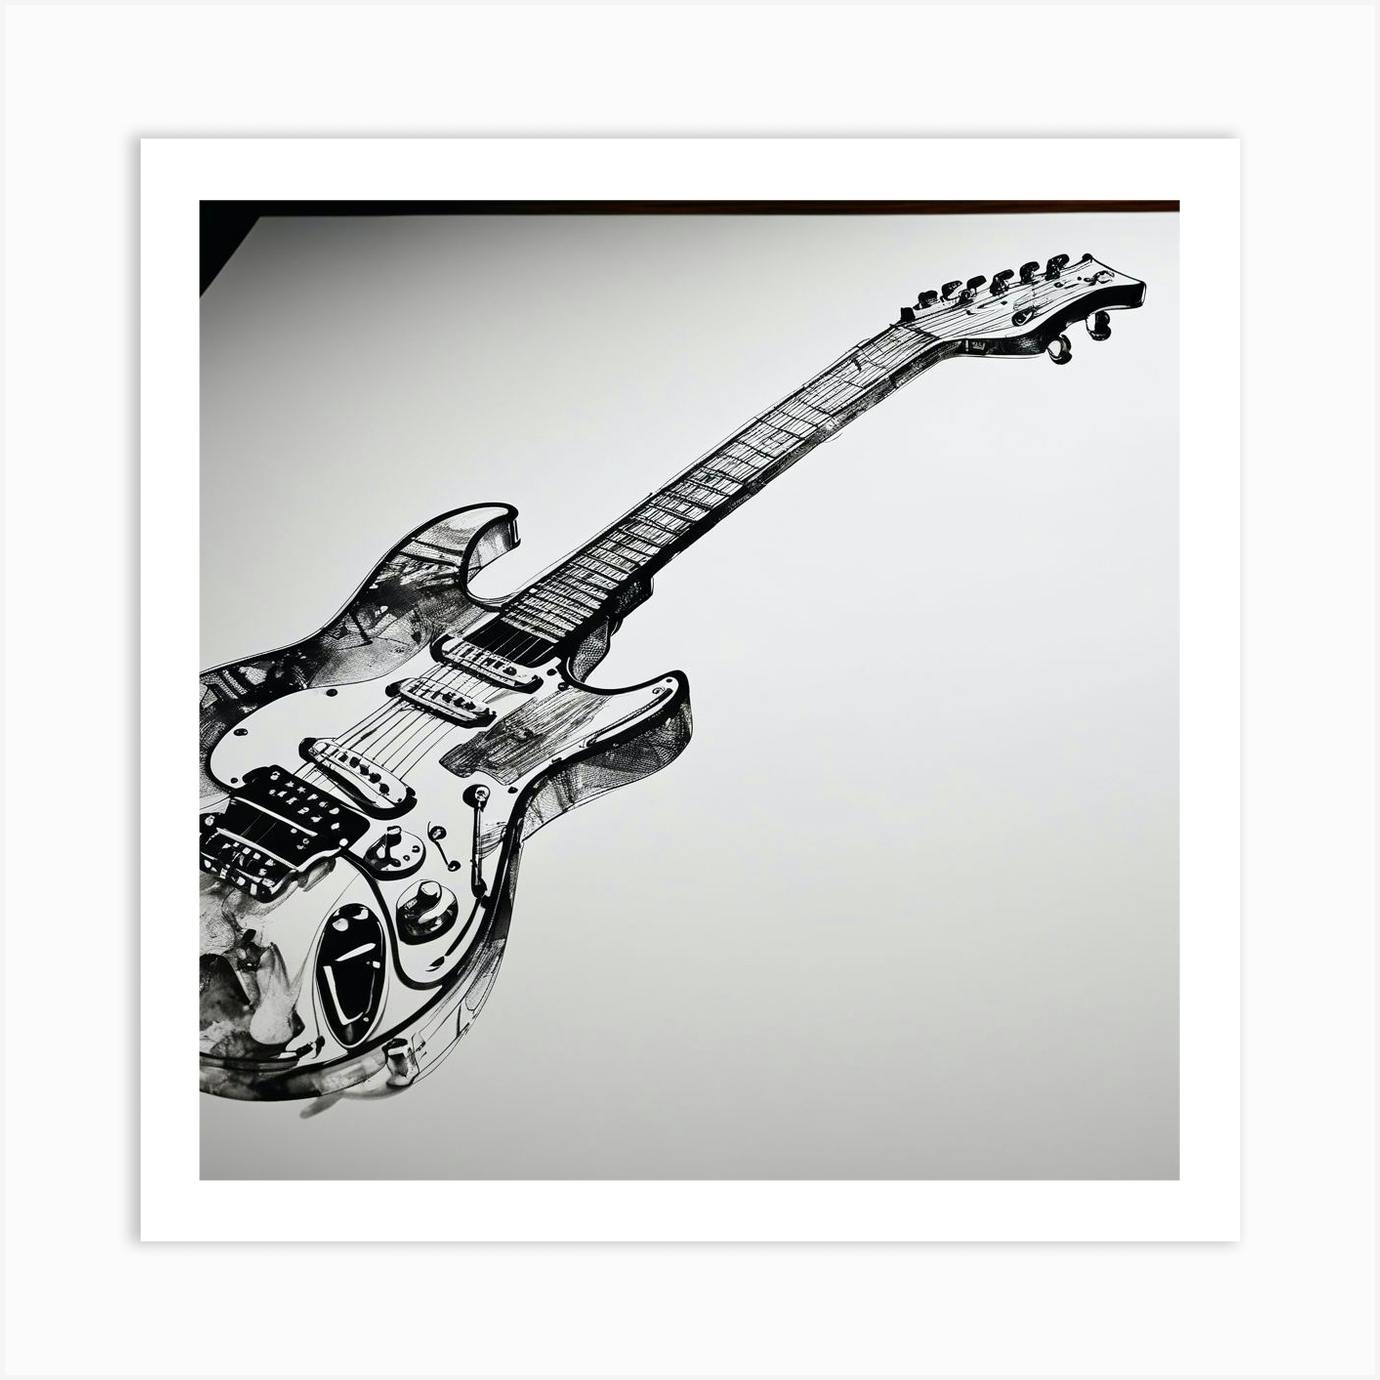 Electric guitar drawing stock vector. Illustration of graphic - 22416983